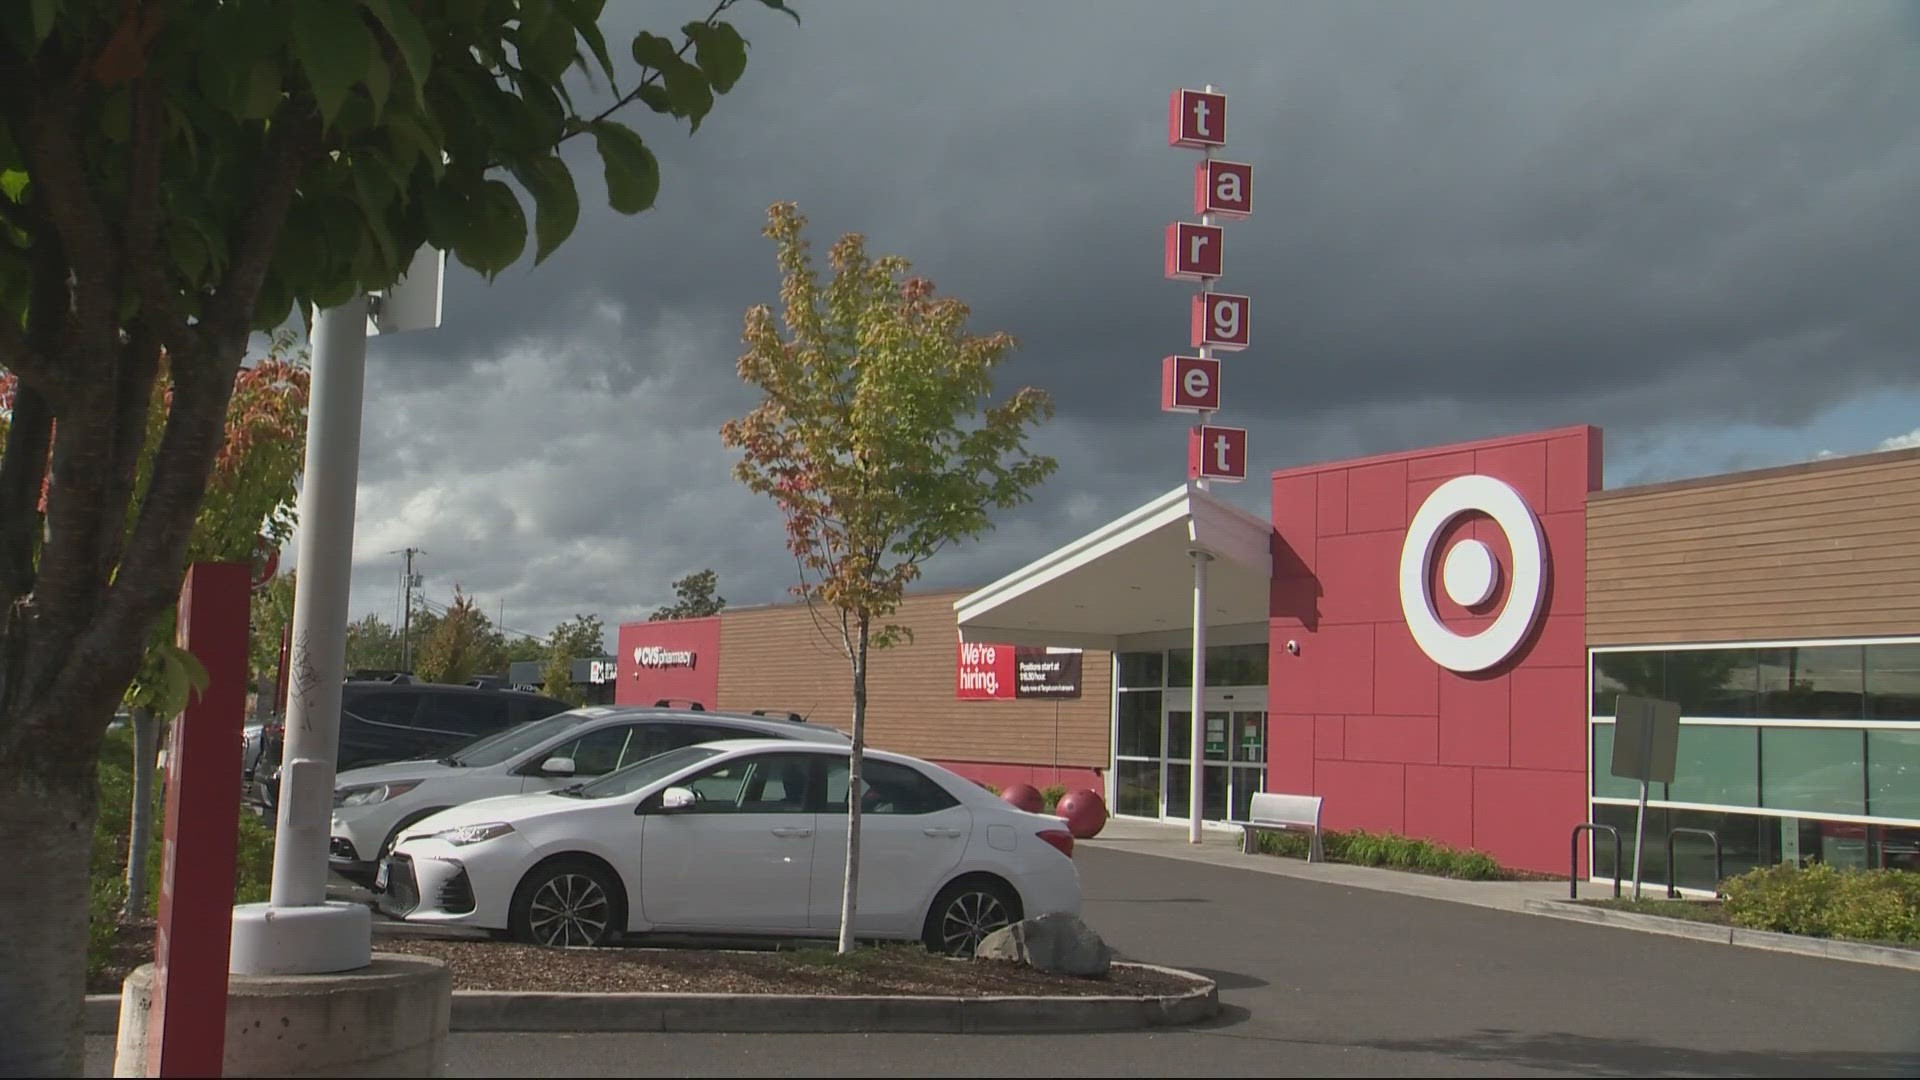 Target closing 9 stores due to 'theft and organized retail crime